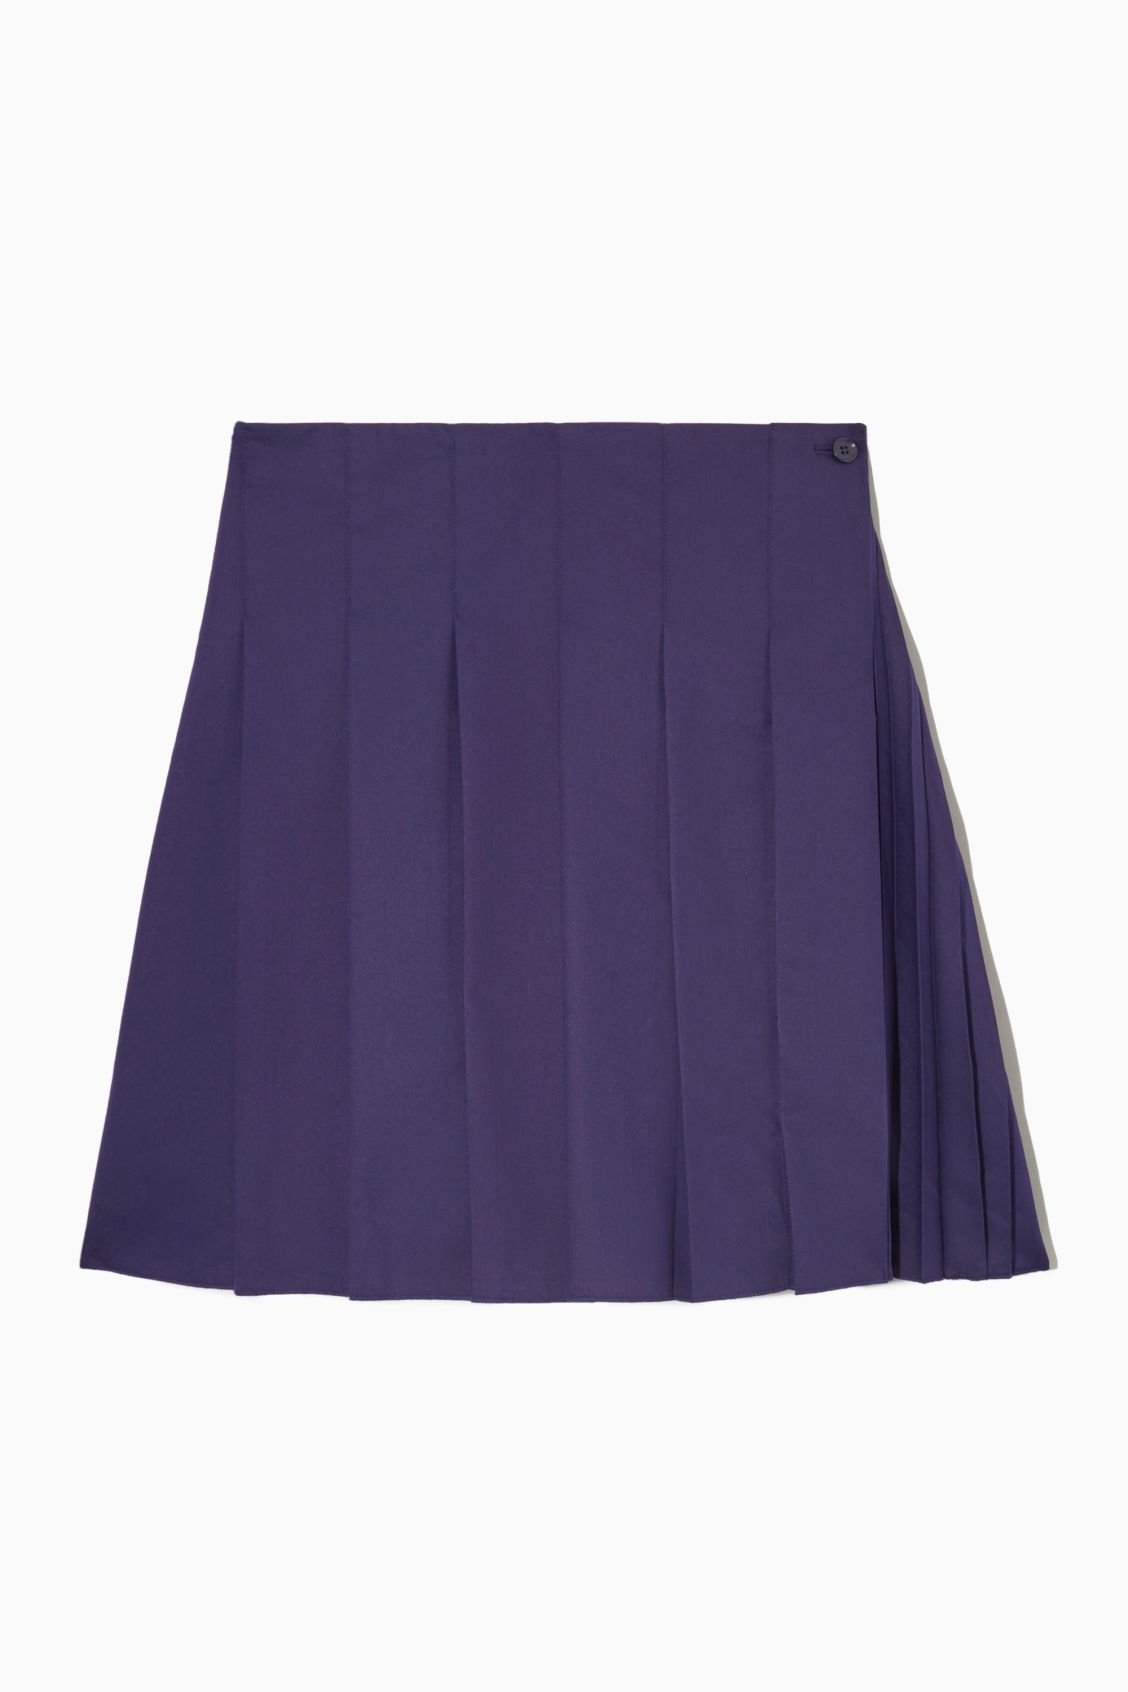 COS Pleated Mini Skirt in NAVY | Endource